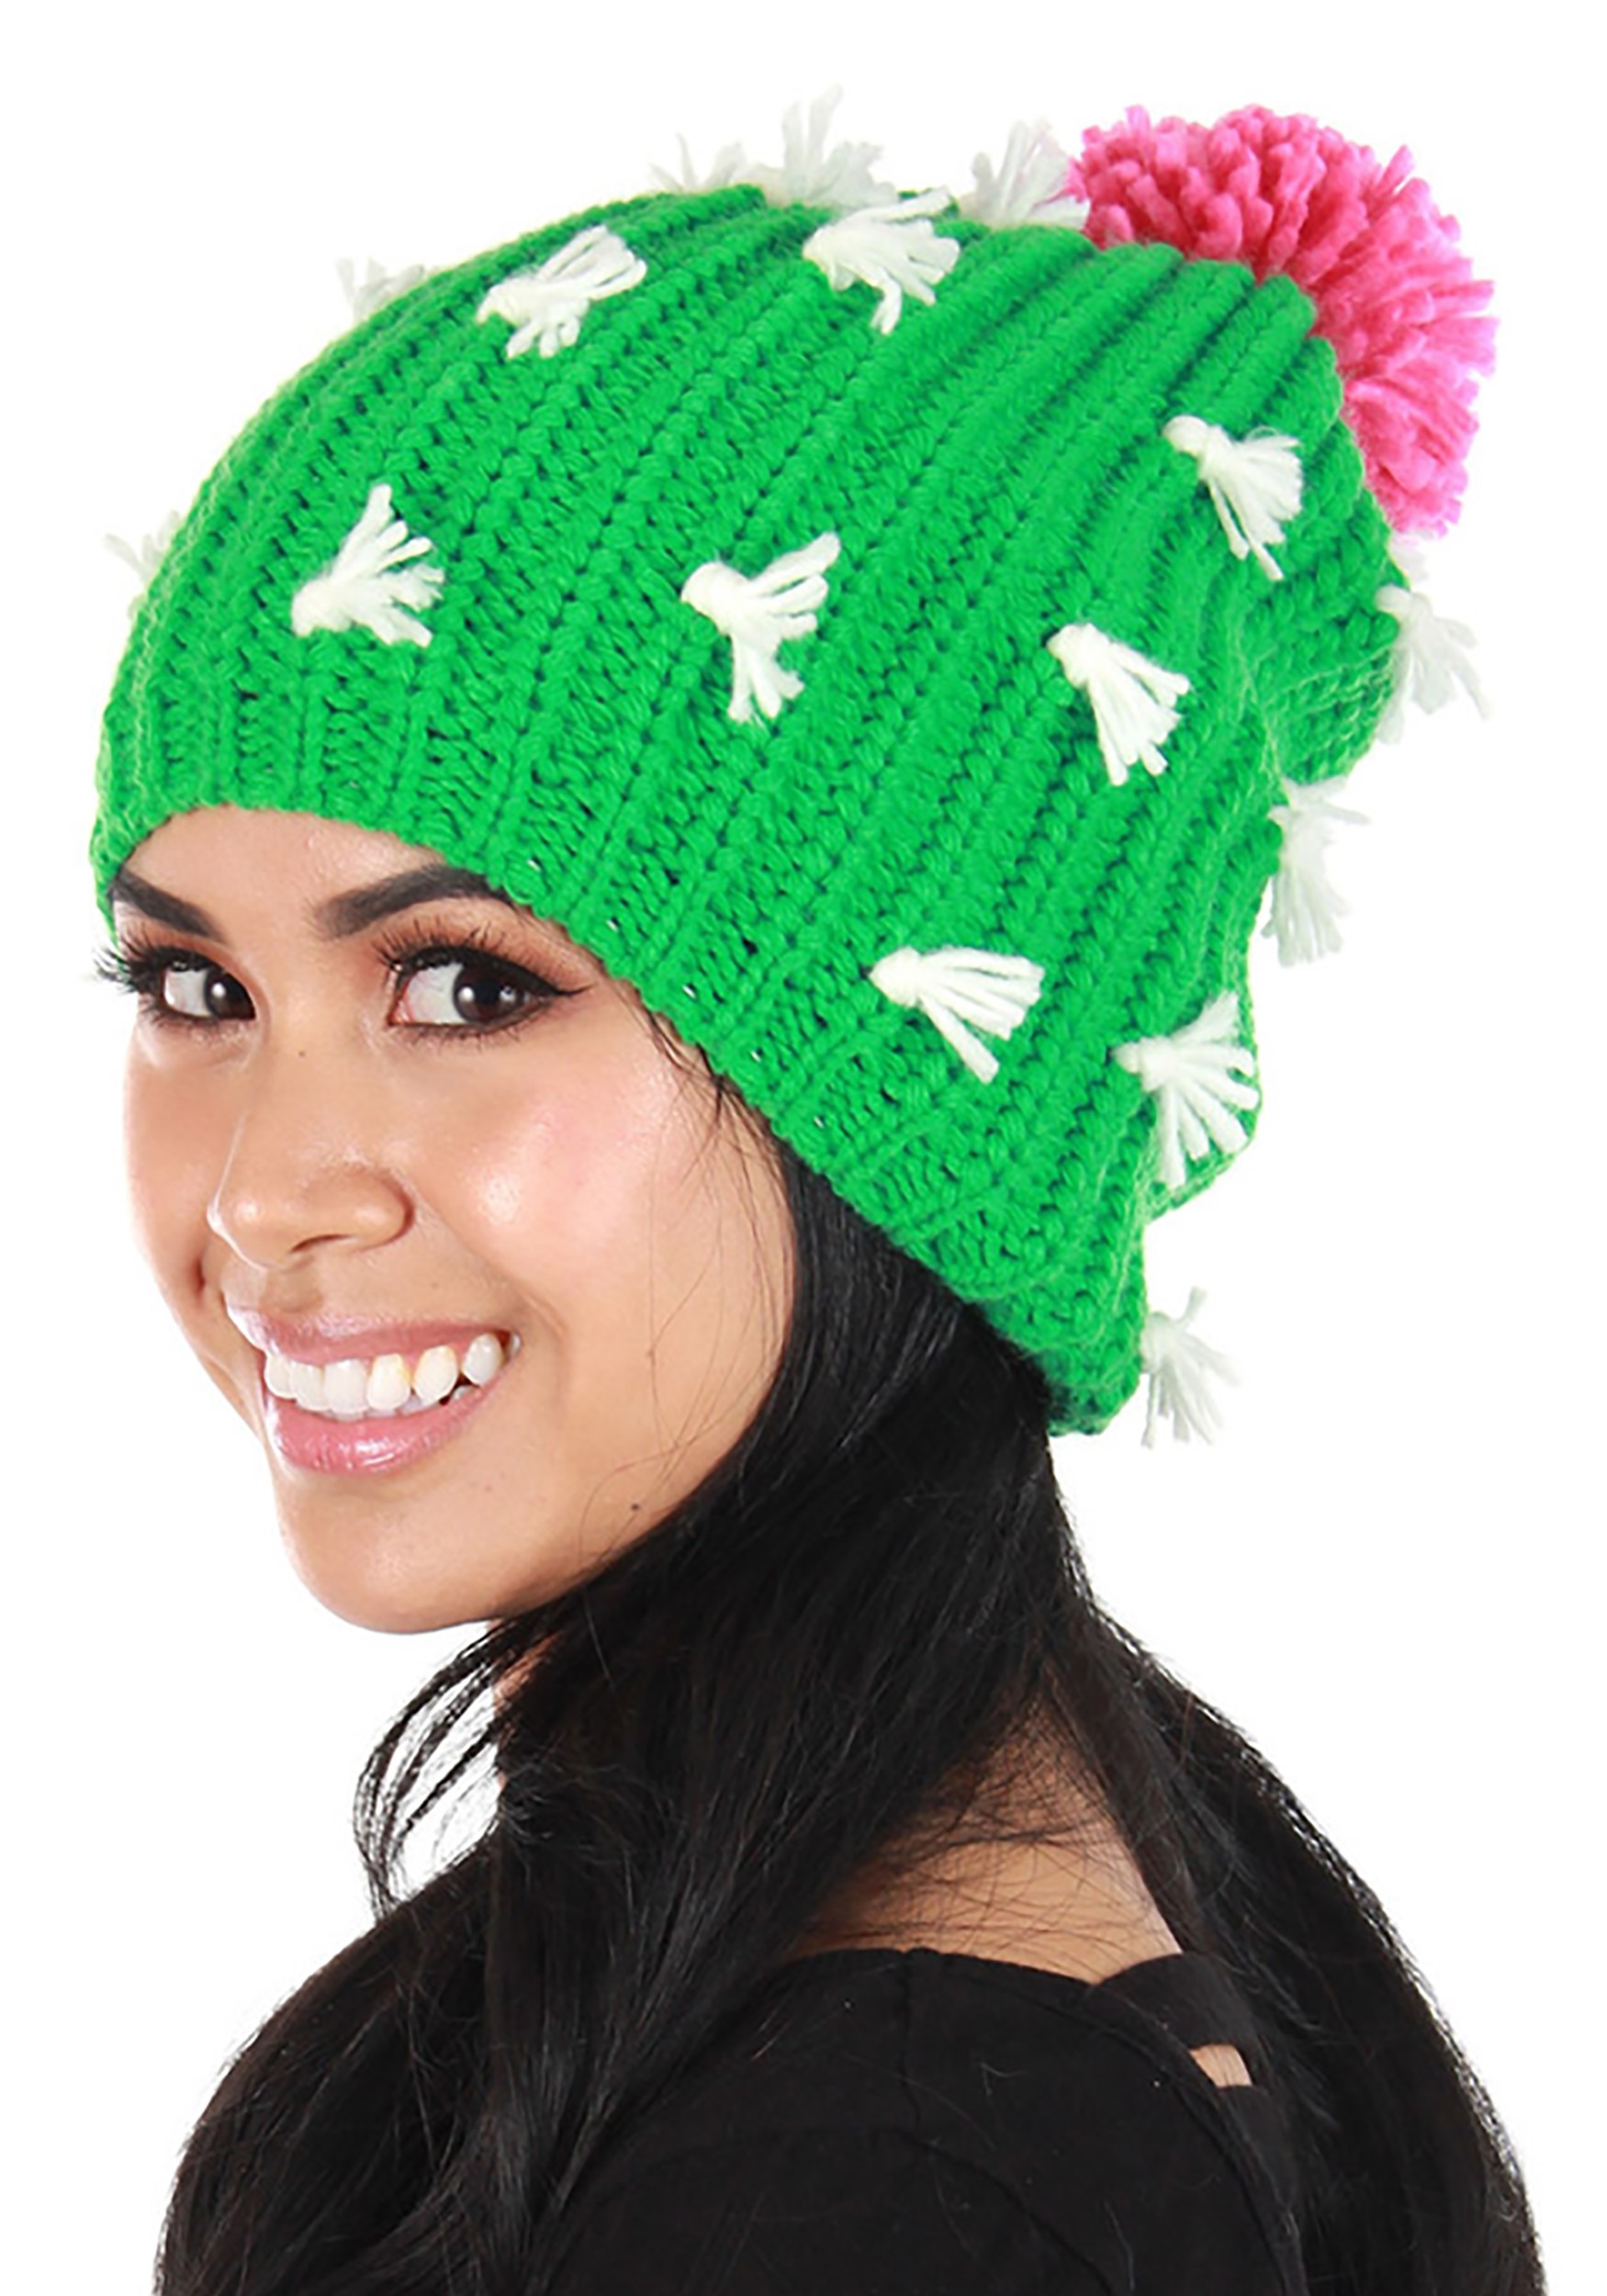 Adult Knit Cactus Slouch Beanie , Knitted Hat